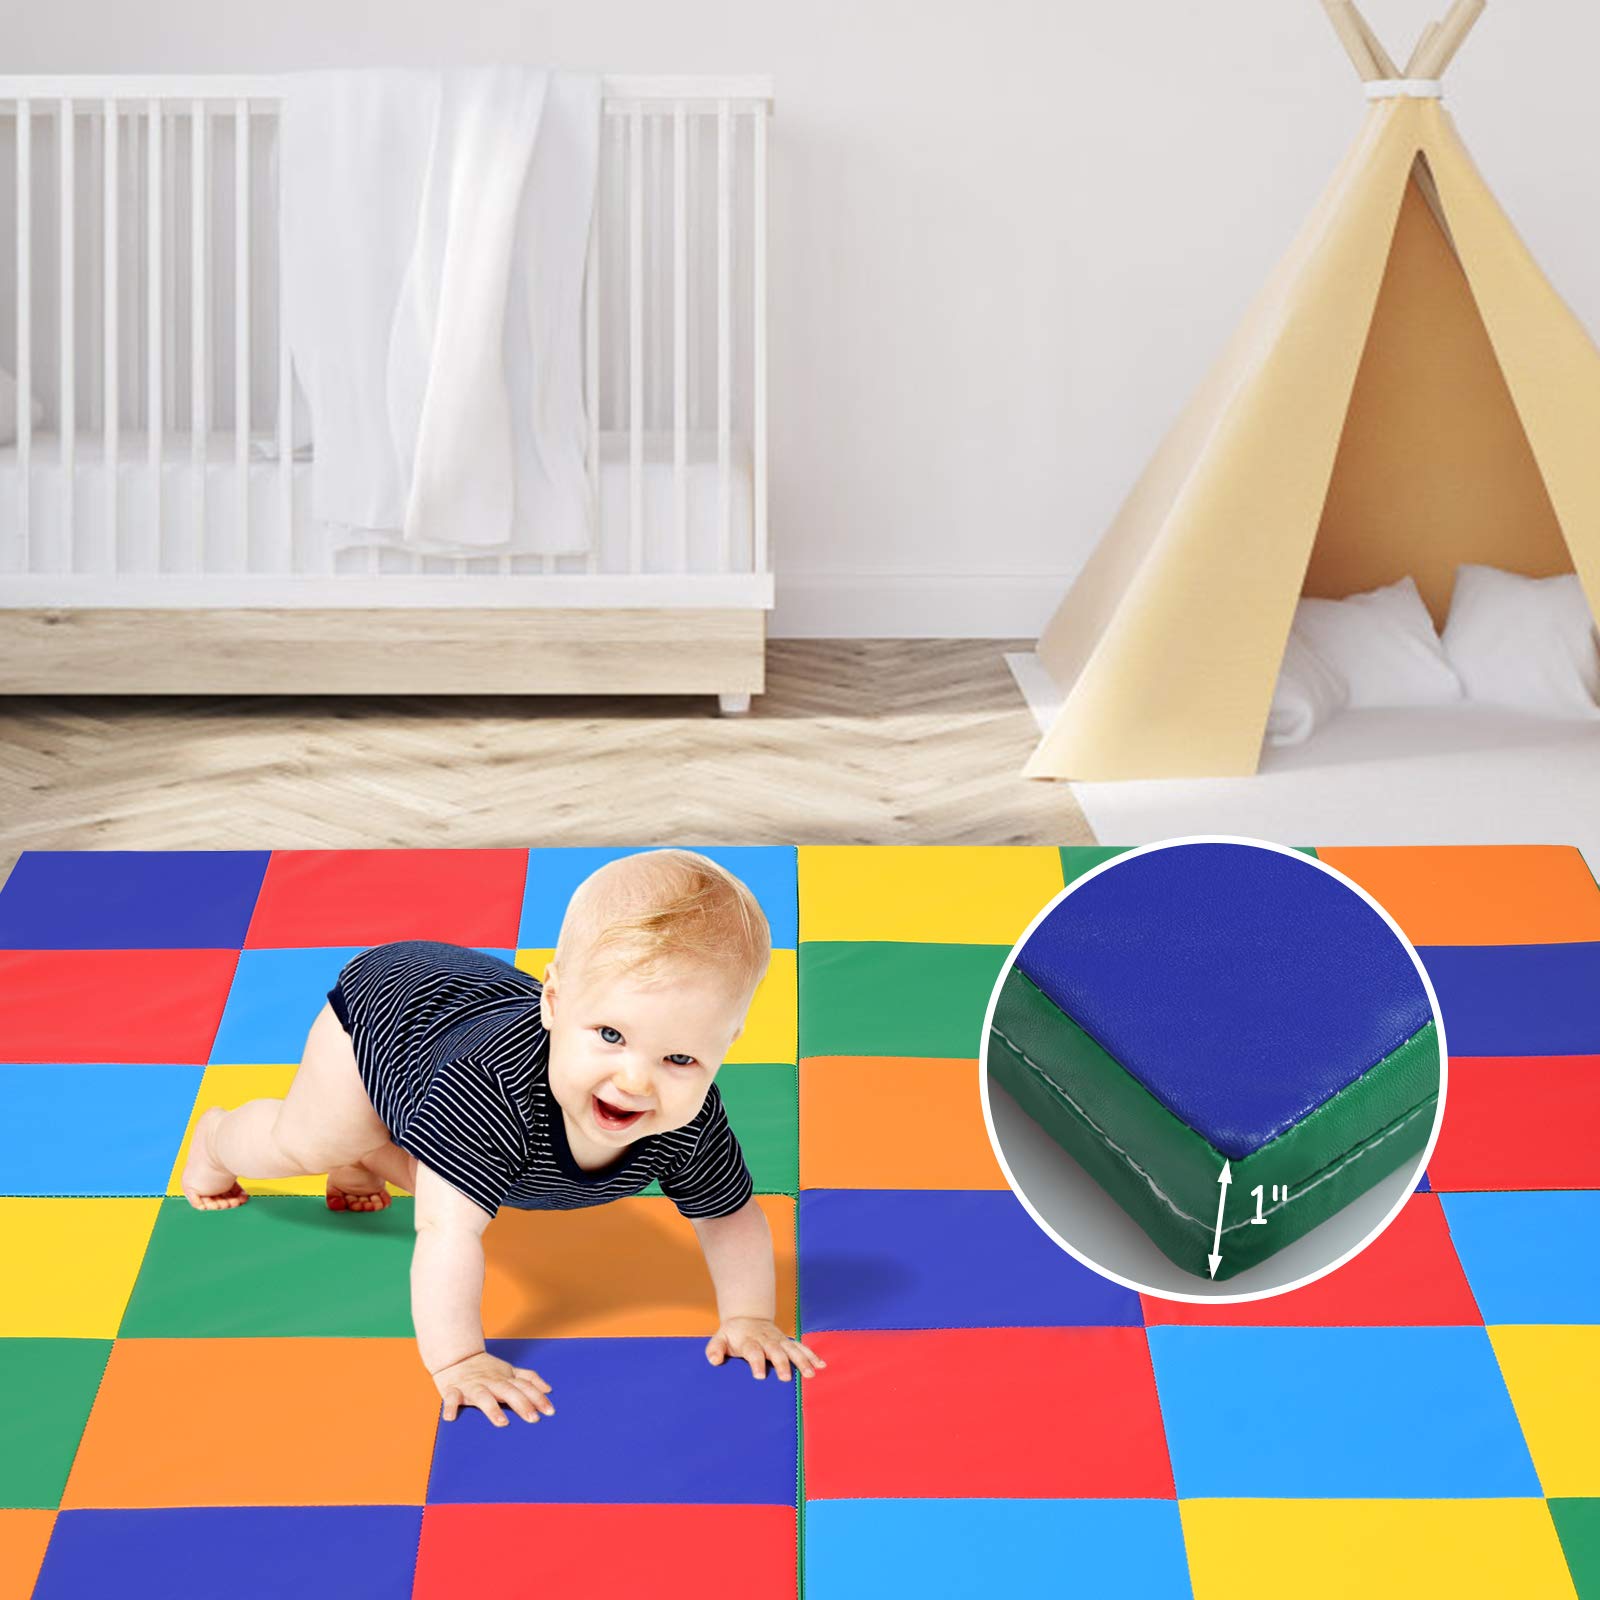 Costzon Toddler Foam Play Mat, Foldable Baby Crawling Mats 58-Inch Square Soft Non Skid Colorful Daycare Floor Mat, Thicken Waterproof Memory Activity Play Mat for Home, School, Kindergarten Nursery